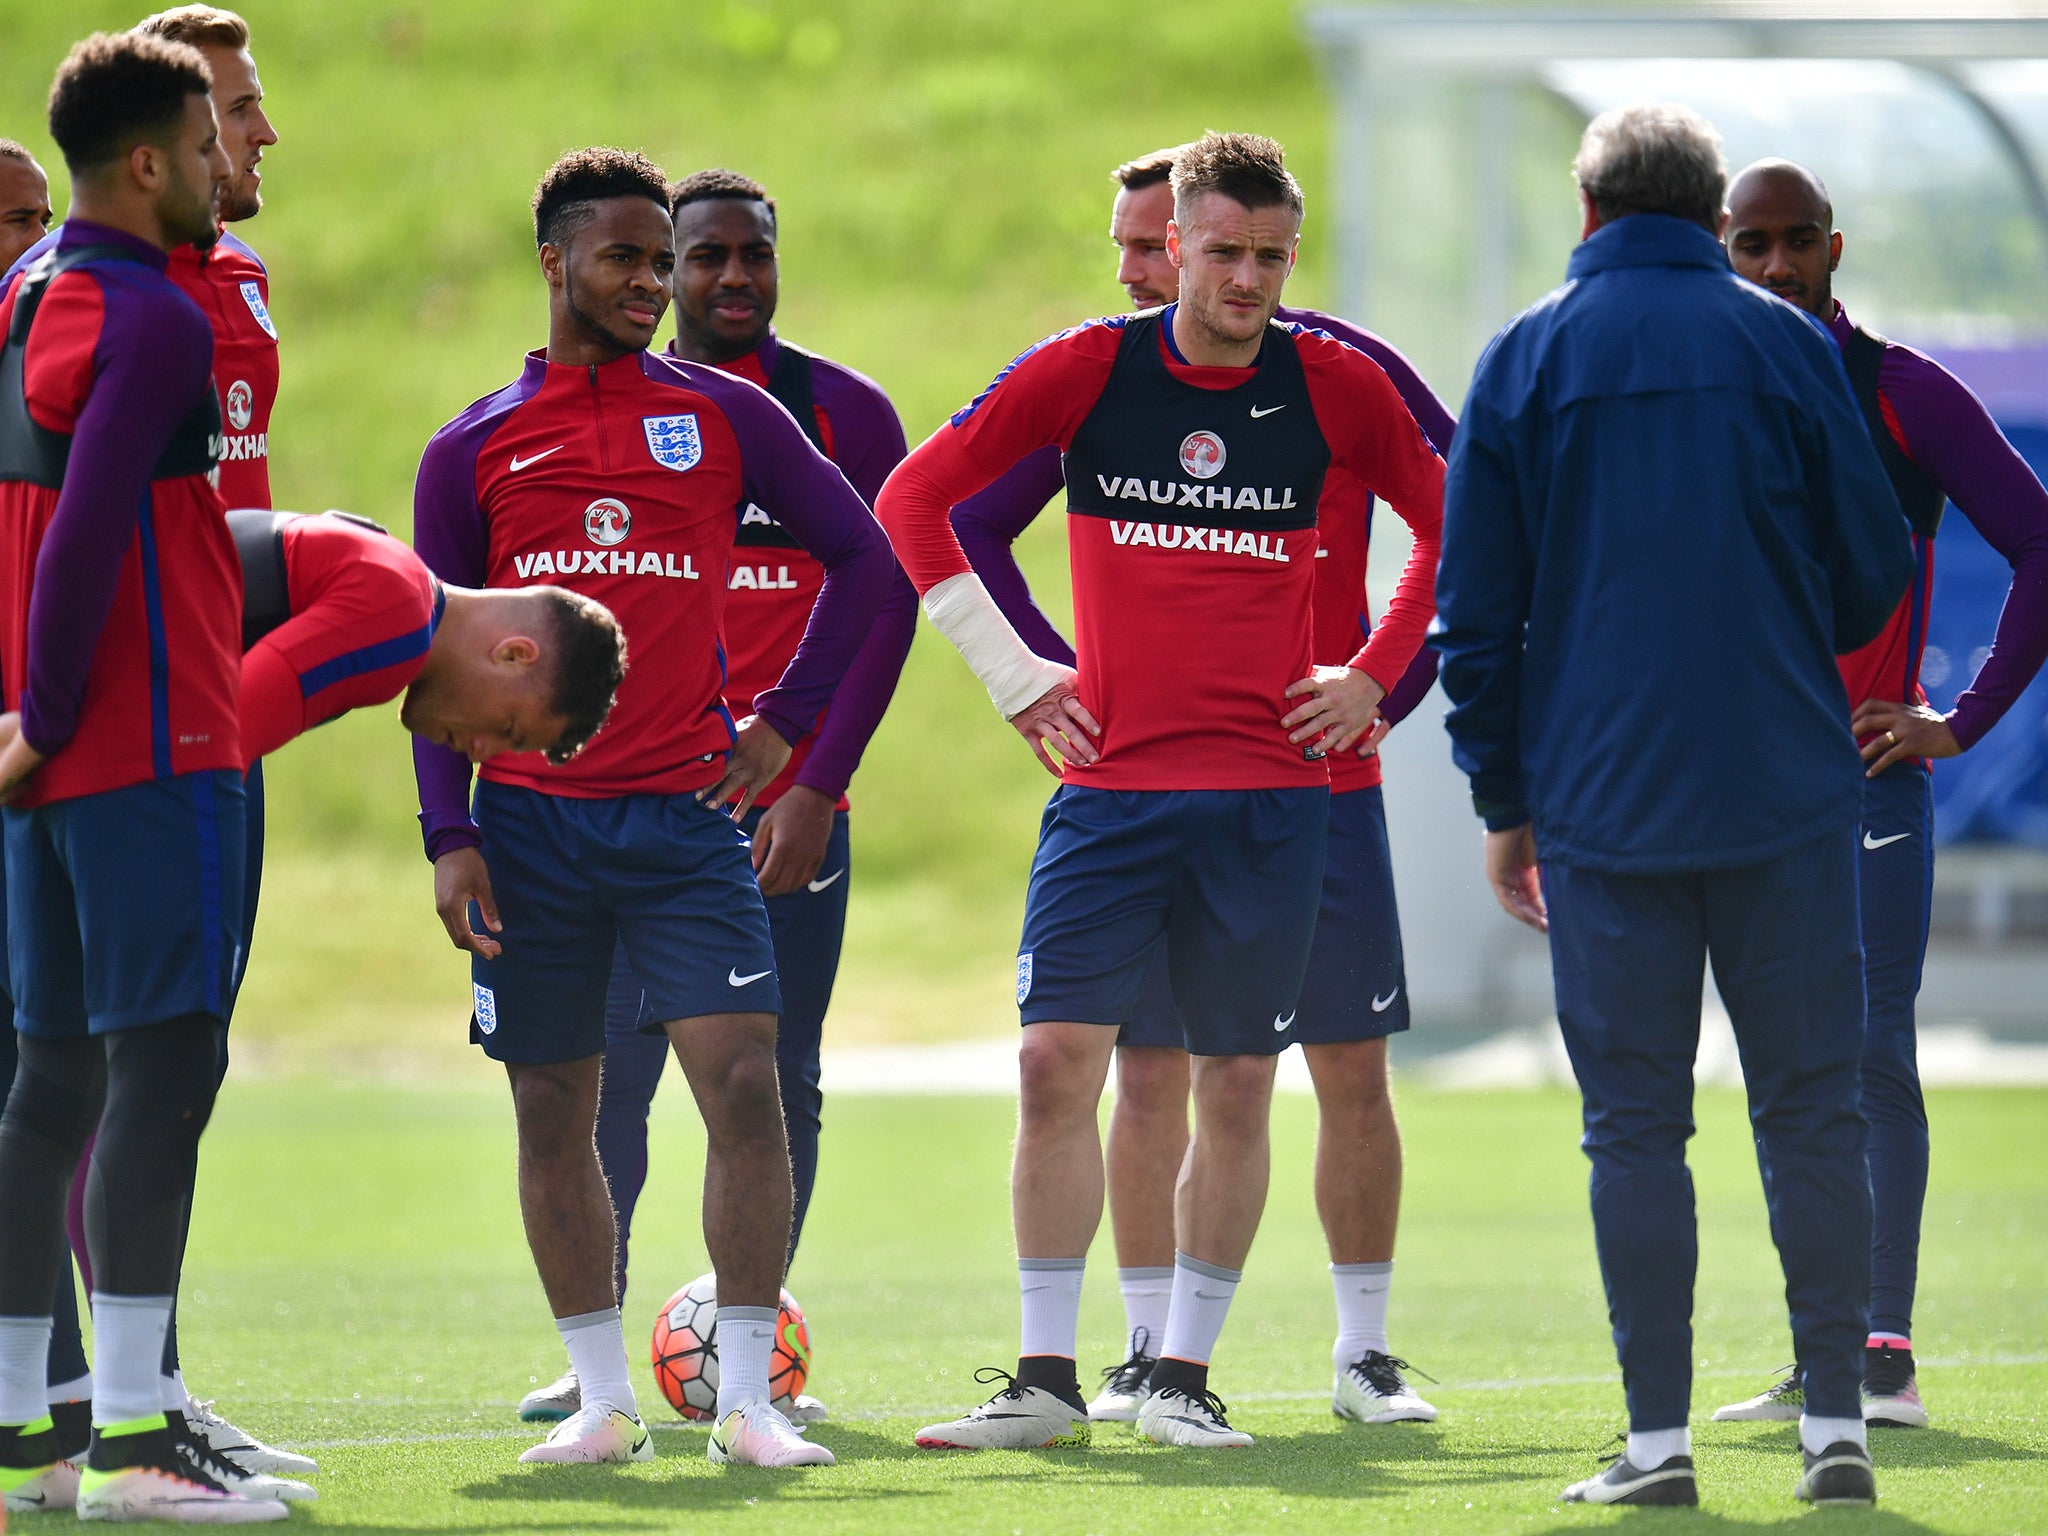 England's first day of their Euro 2016 training camp was disrupted by a security breach